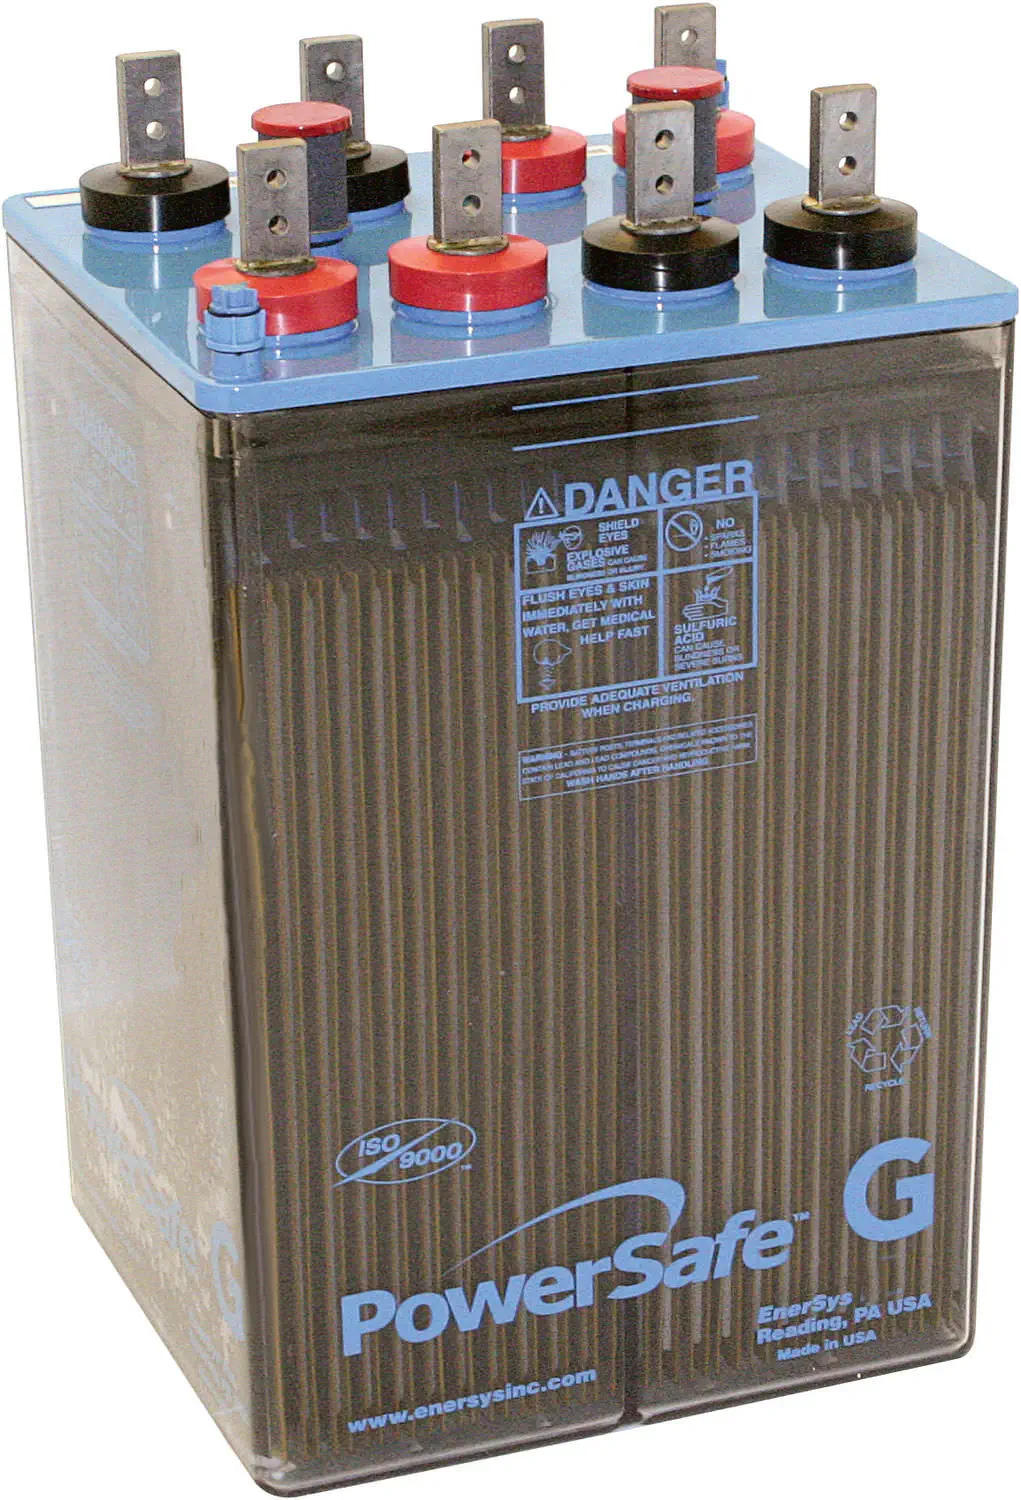 EnerSys PowerSafe GN-45